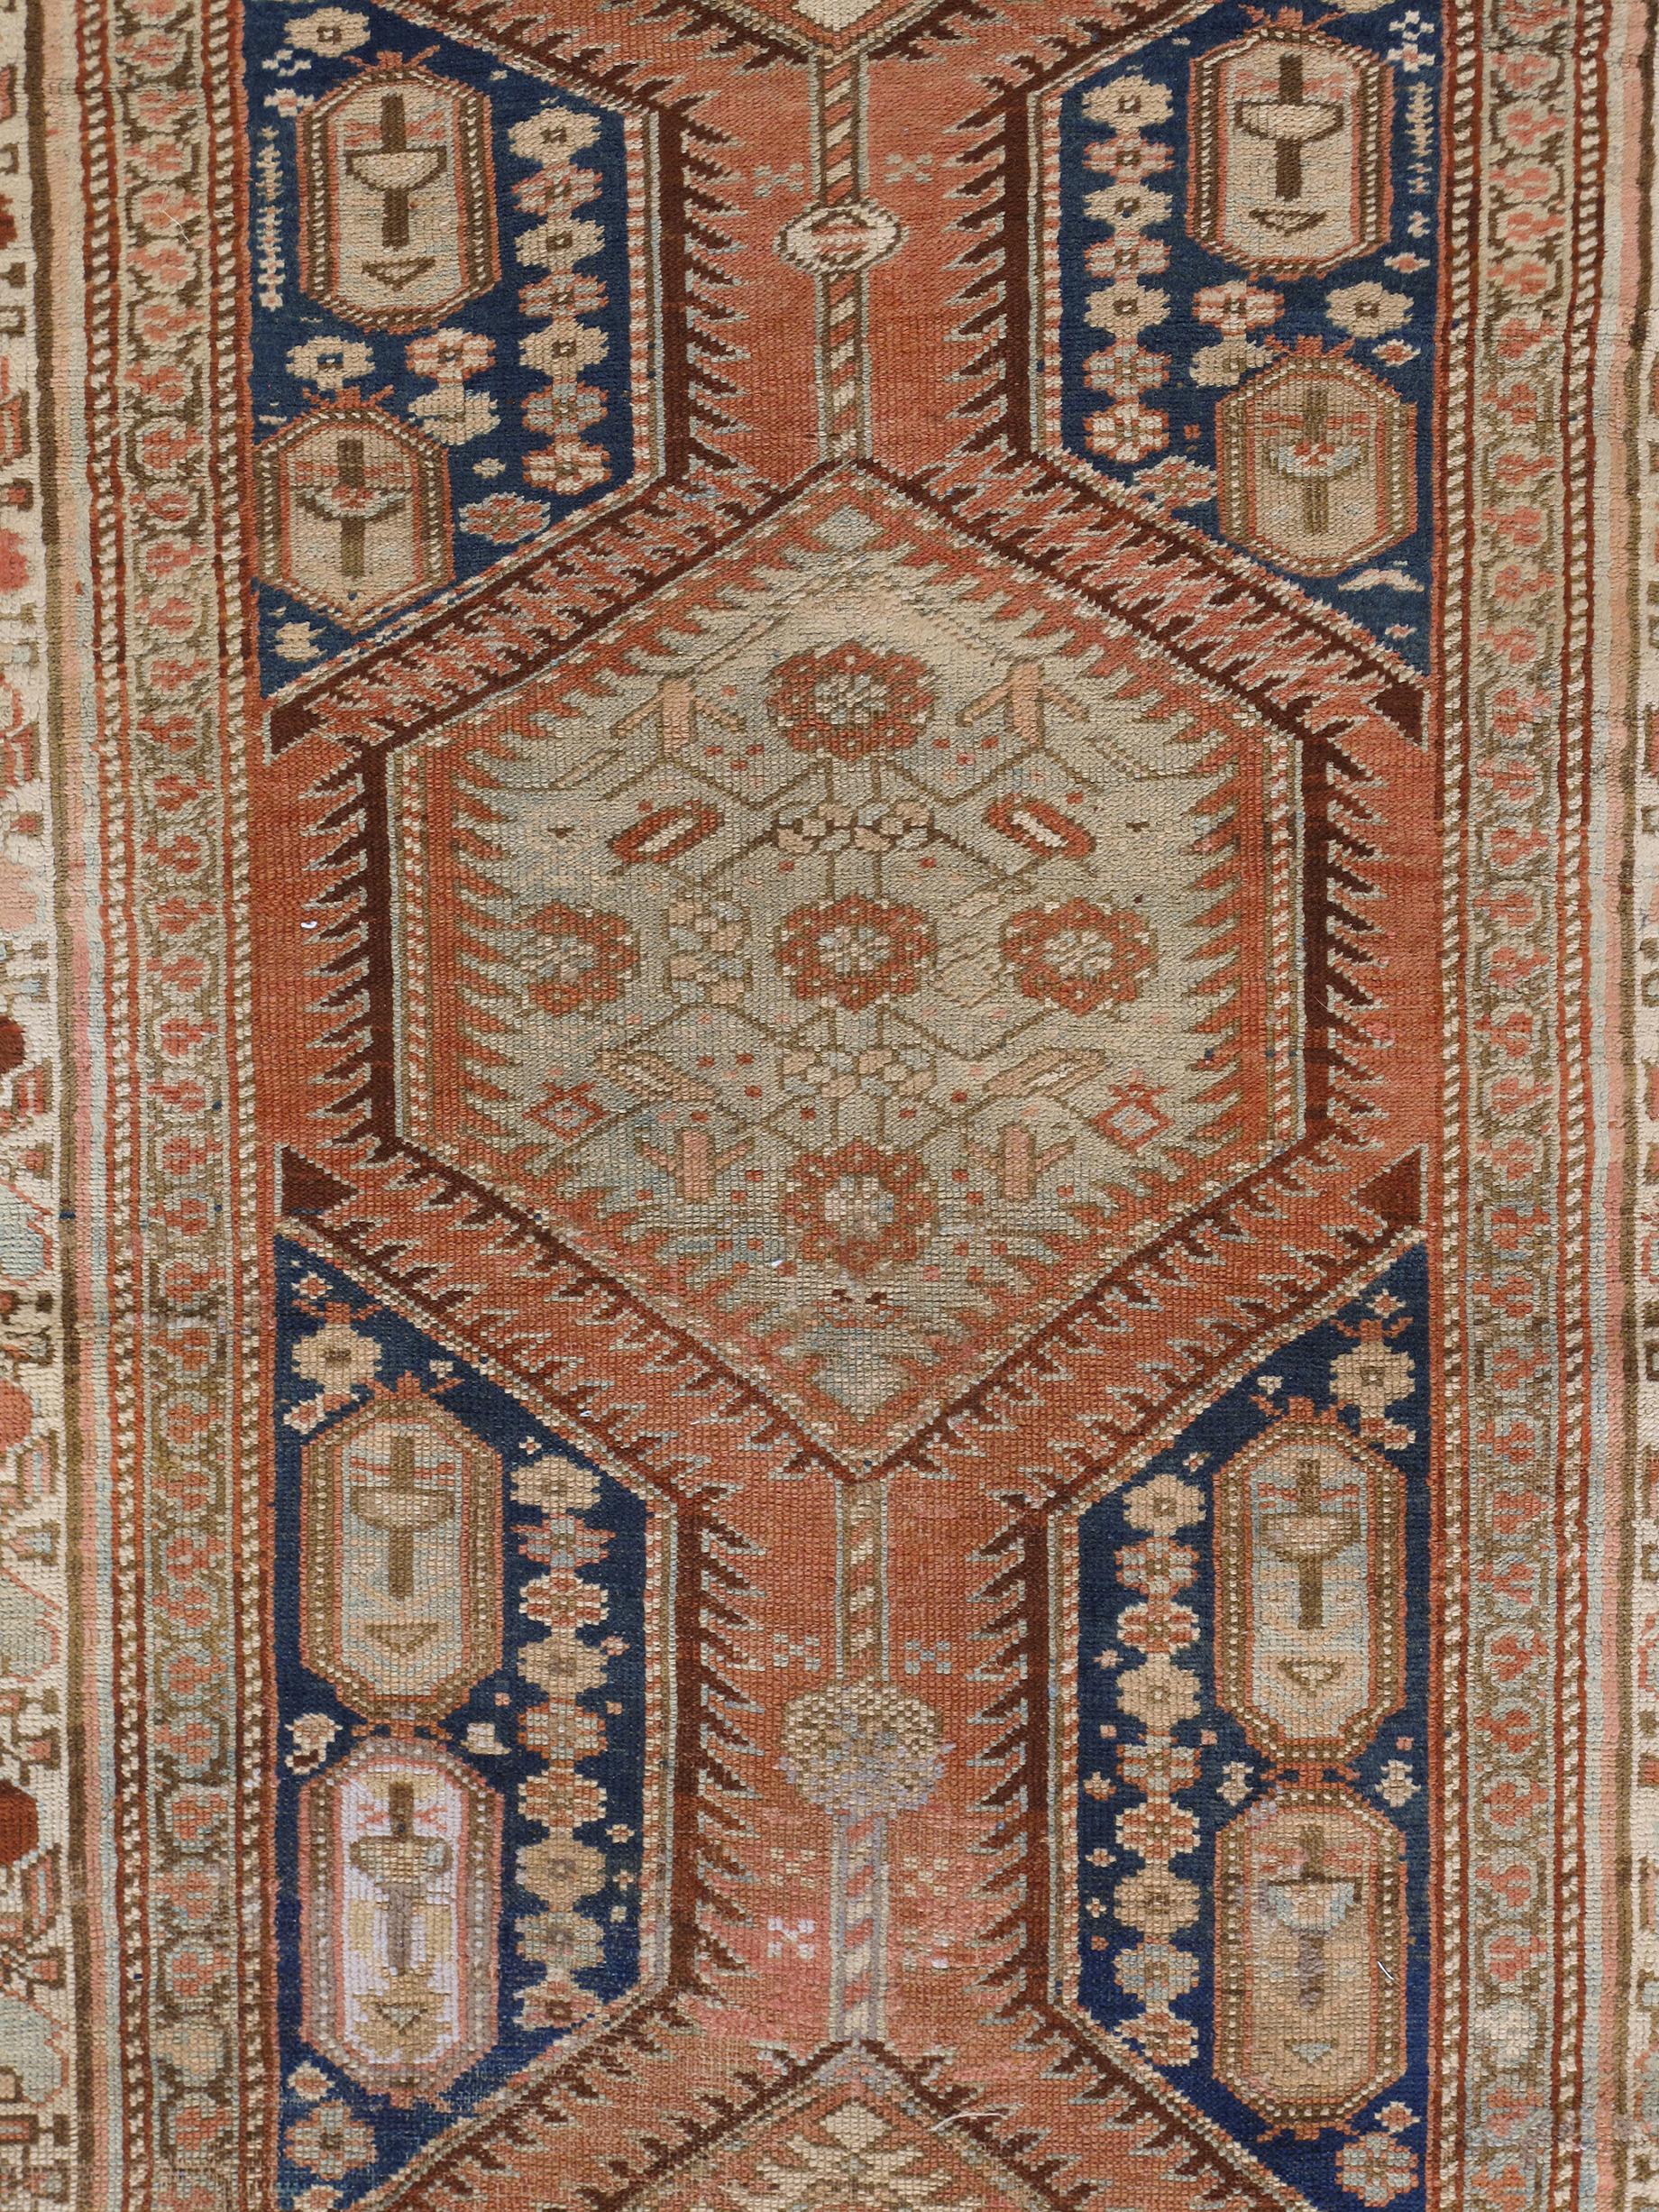 This runner resembles the rare and collectible antique Serab rugs that were produced in the 19th century and earlier.  Due to their limited availability, NASIRI revived the ancient dyeing and weaving techniques that had dissolved over the years to